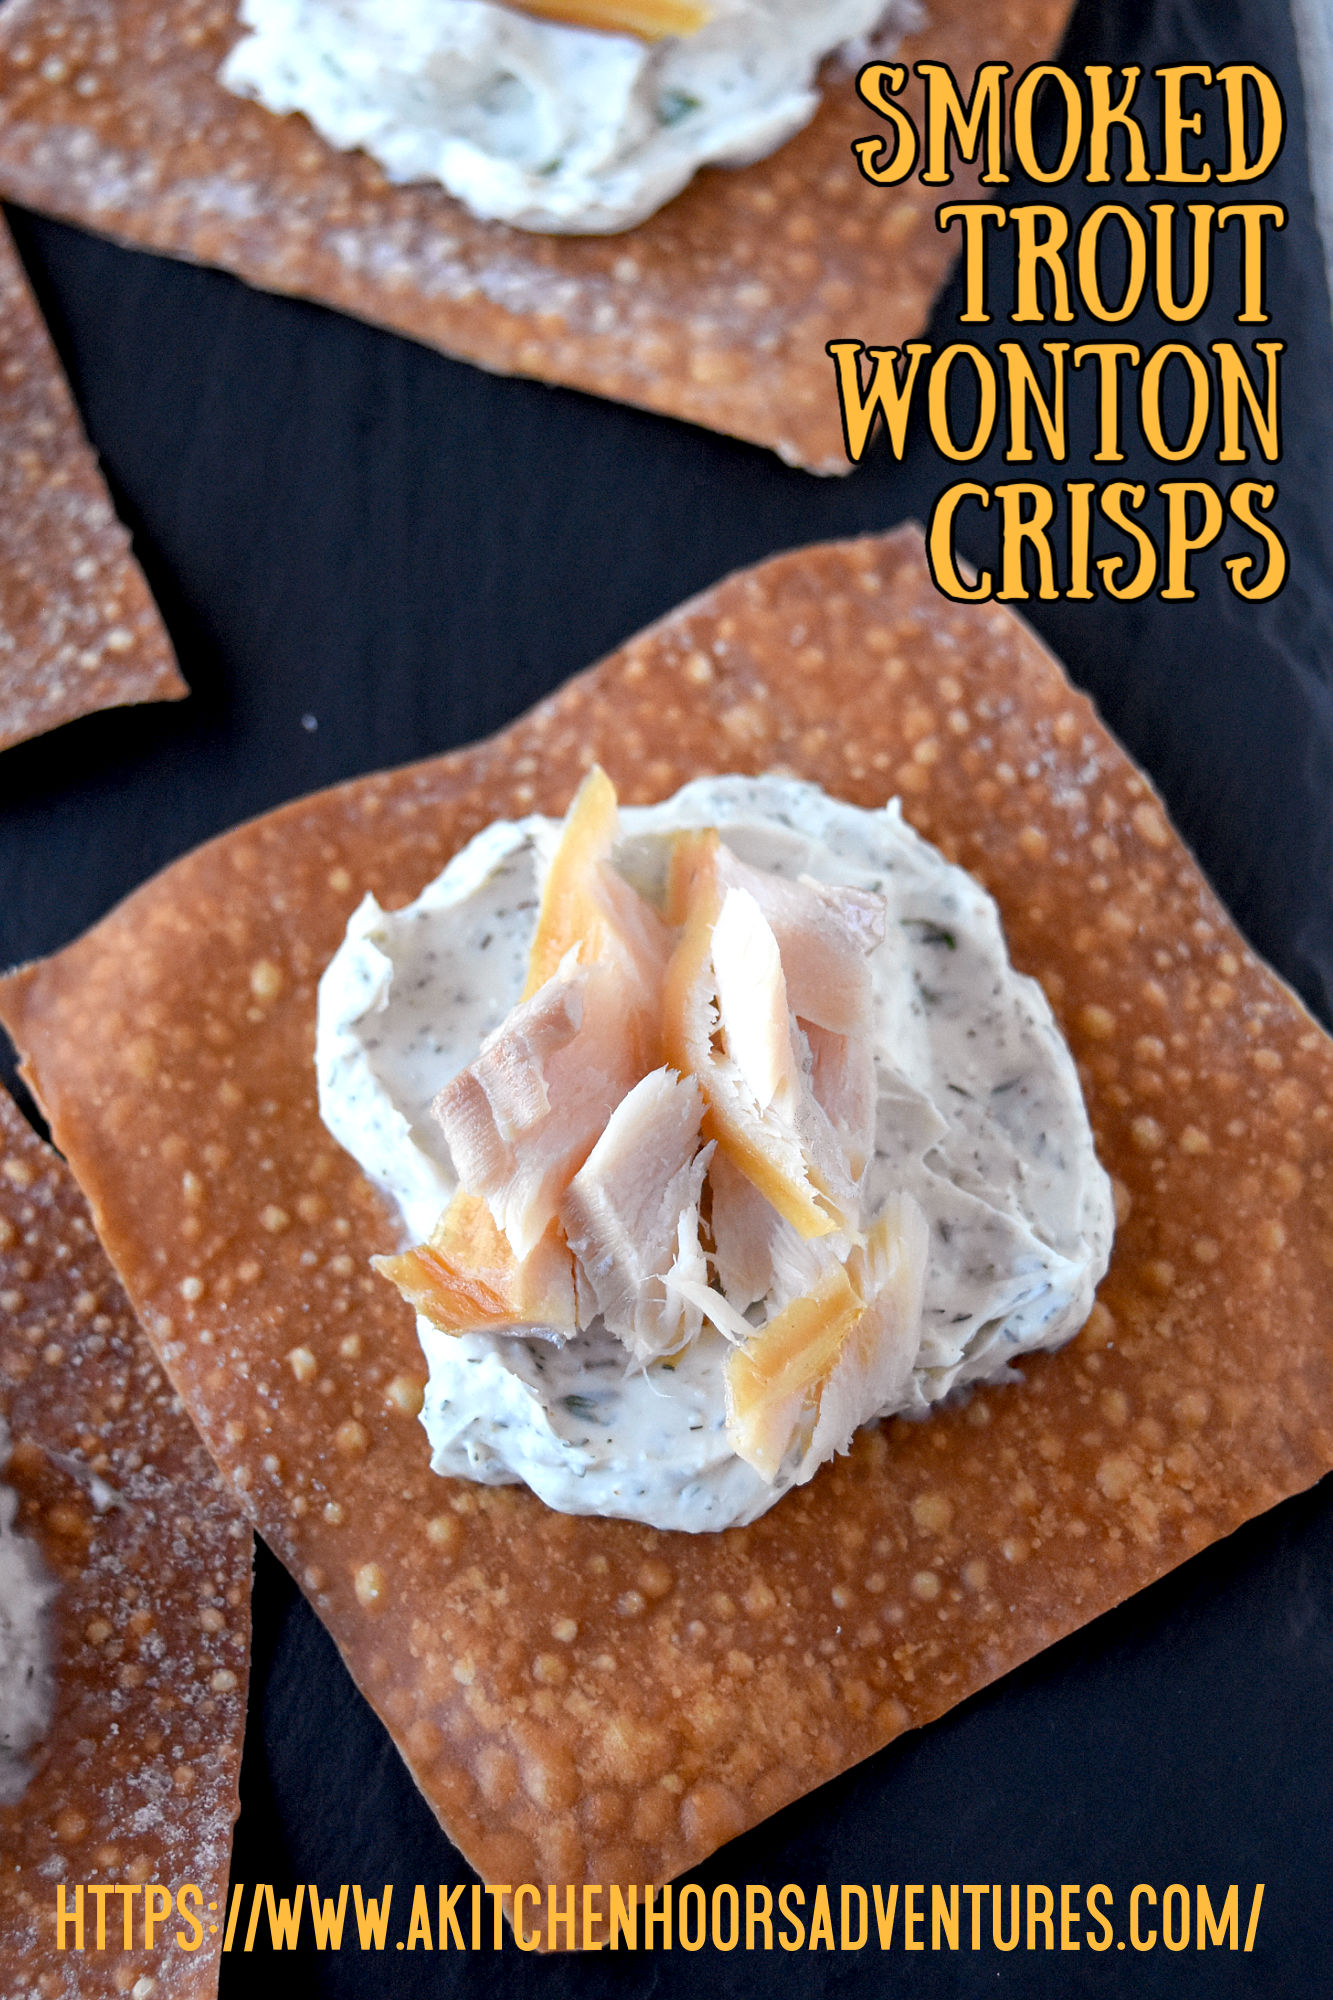 Smoked Trout Wonton Crisps are easy to prepare and a deliciously skinny appetizer for the holidays. Made with reduced fat Neufchatel cheese and tons of flavor, your guests won’t even know these are skinny appetizers. #OurFamilyTable #smokedfish #wontoncrisps #easyappetizer #skinnyappetizer